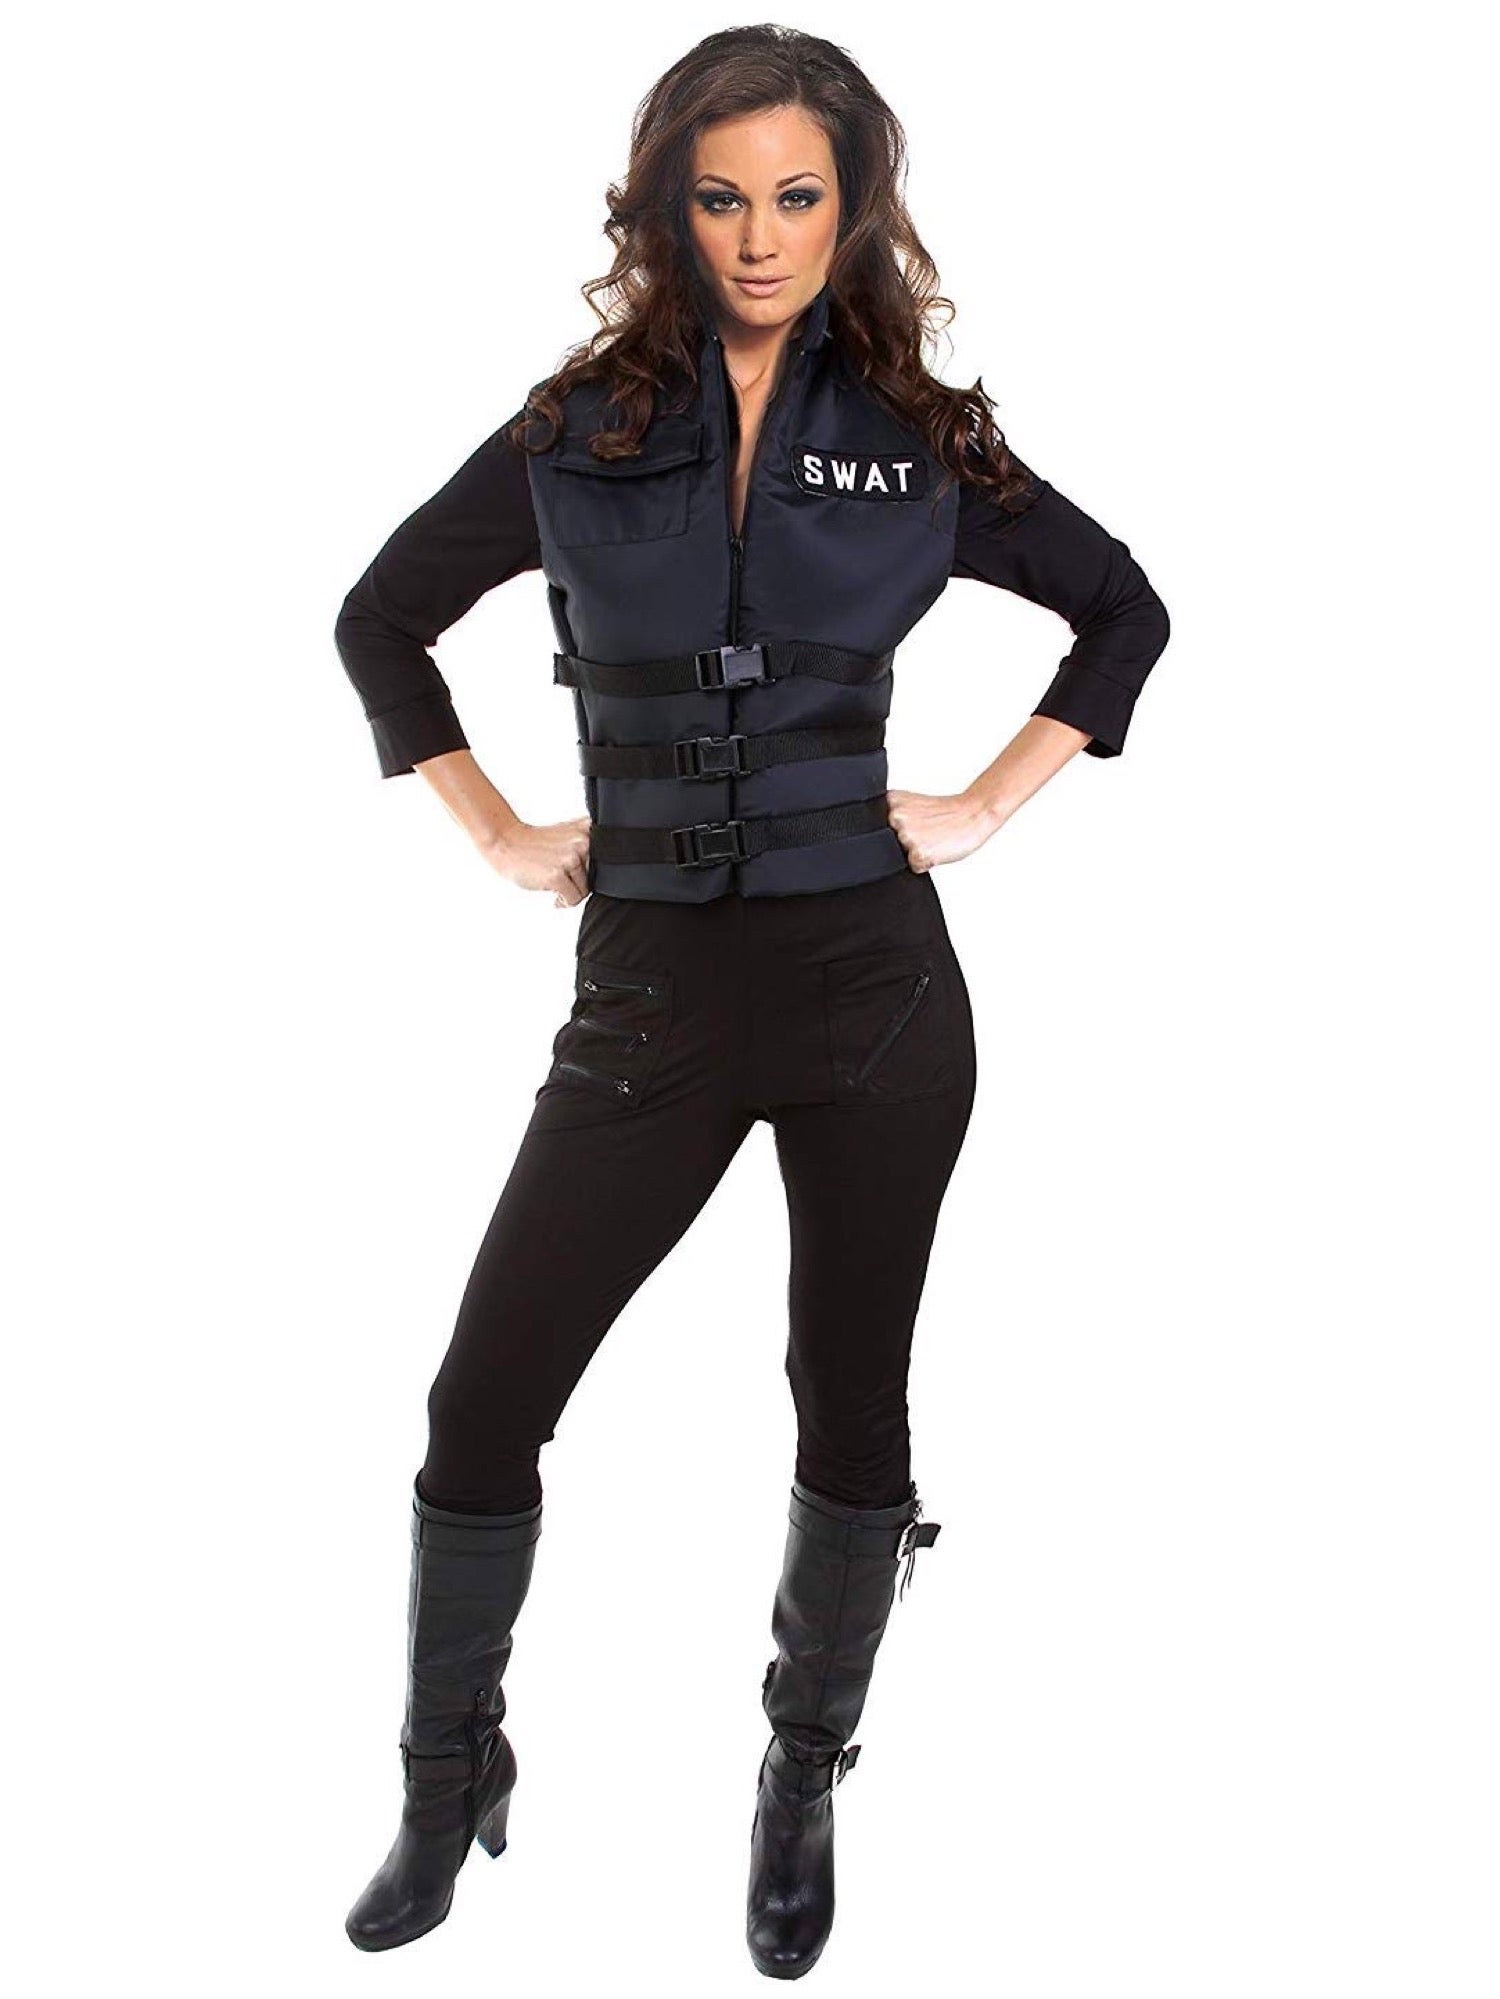 Hobbypos SWAT Girl S.W.A.T. Military Police Cop Commander Uniform Woman Costume